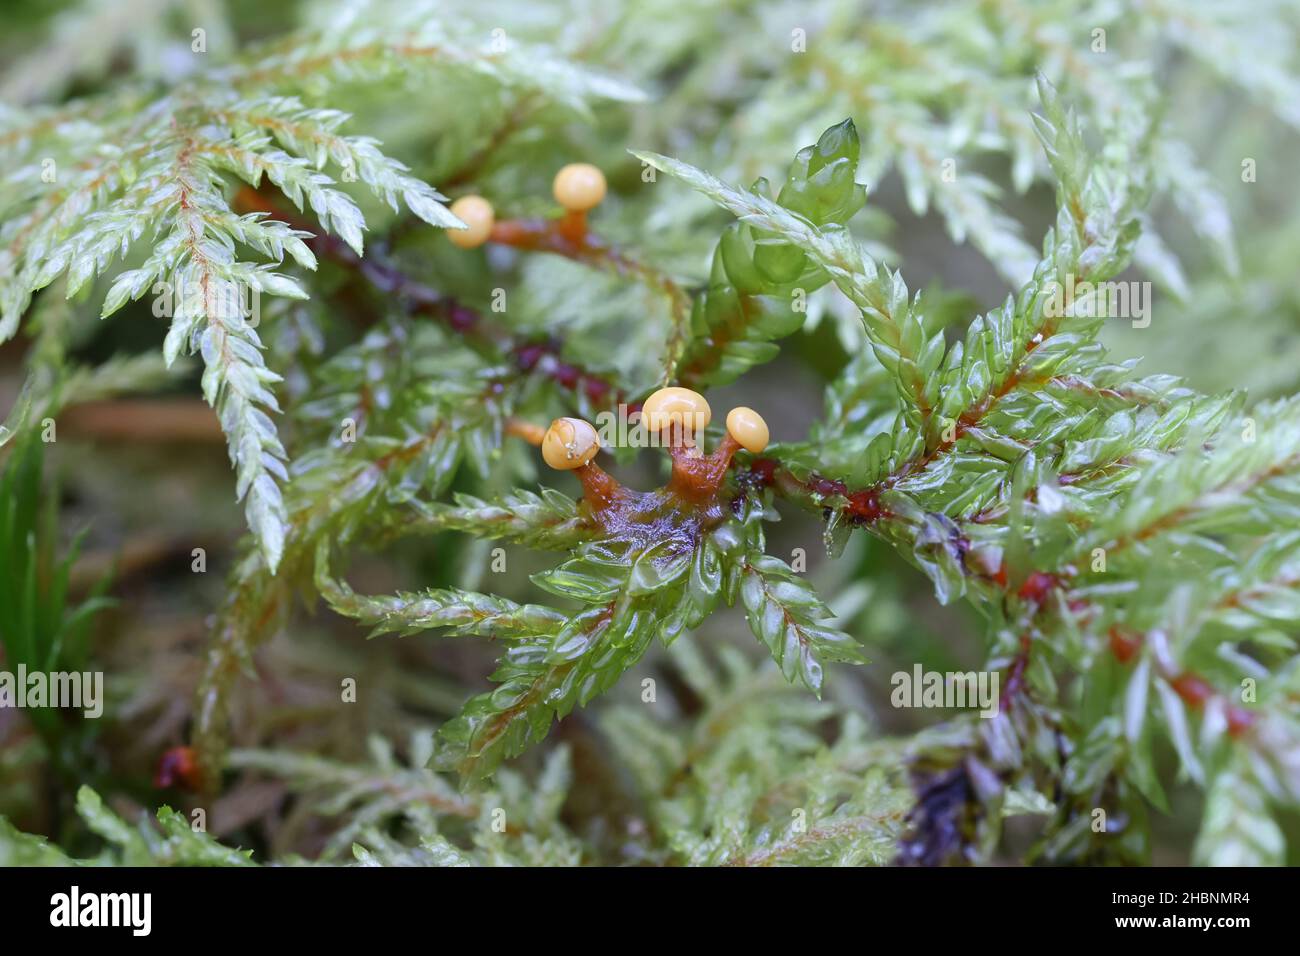 Lepidoderma tigrinum, known as spotted tiger slime mold, early development phase Stock Photo